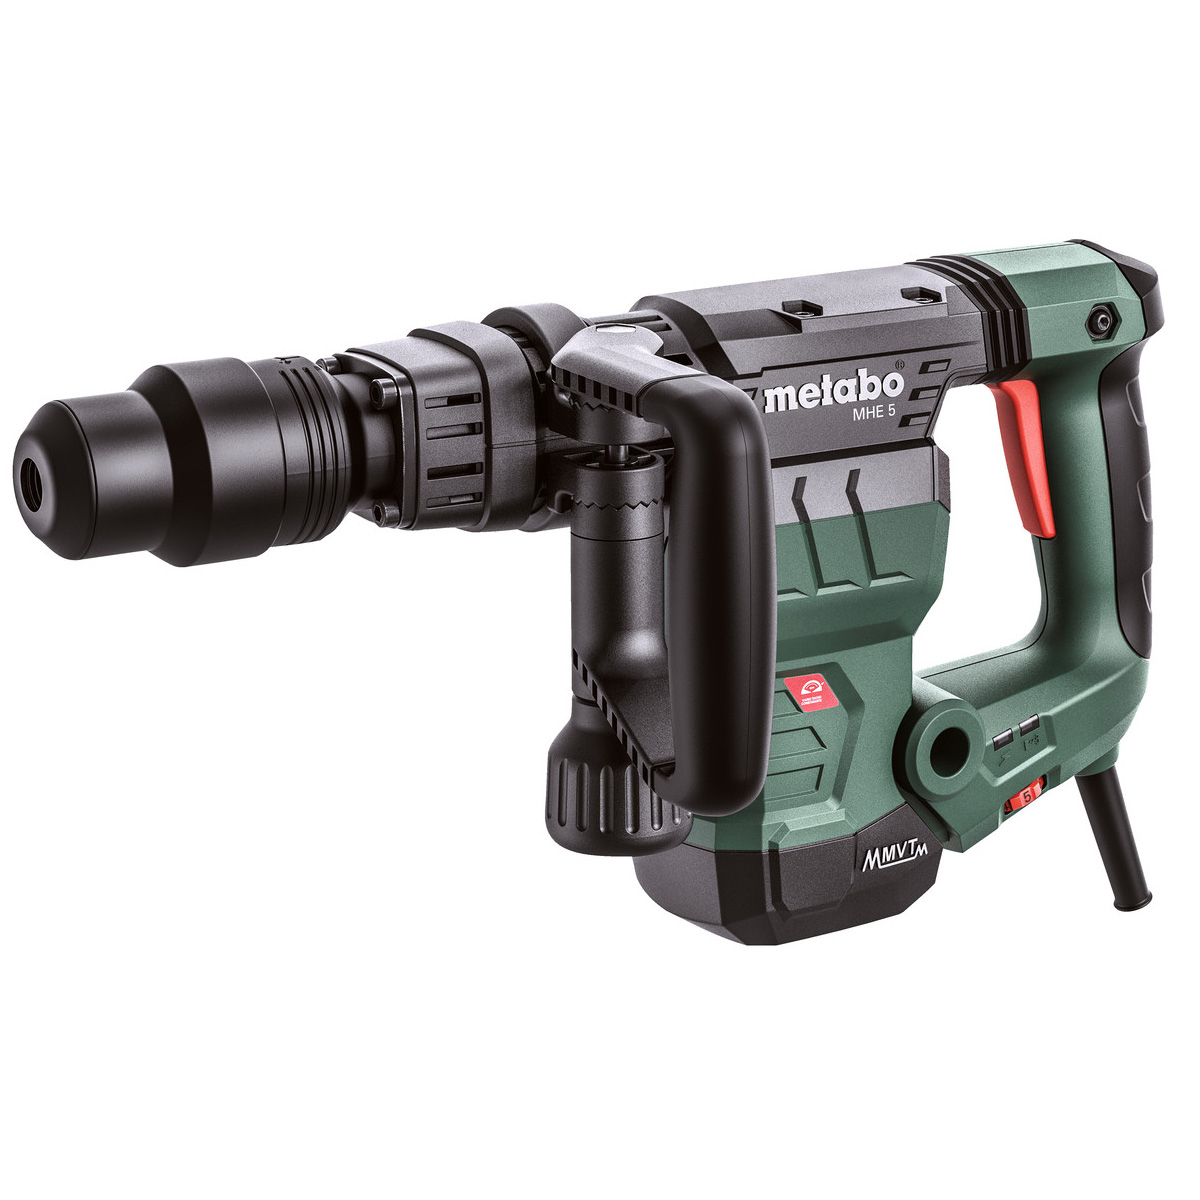 Metabo 1100W Chipping Hammer MHE 5 600148530